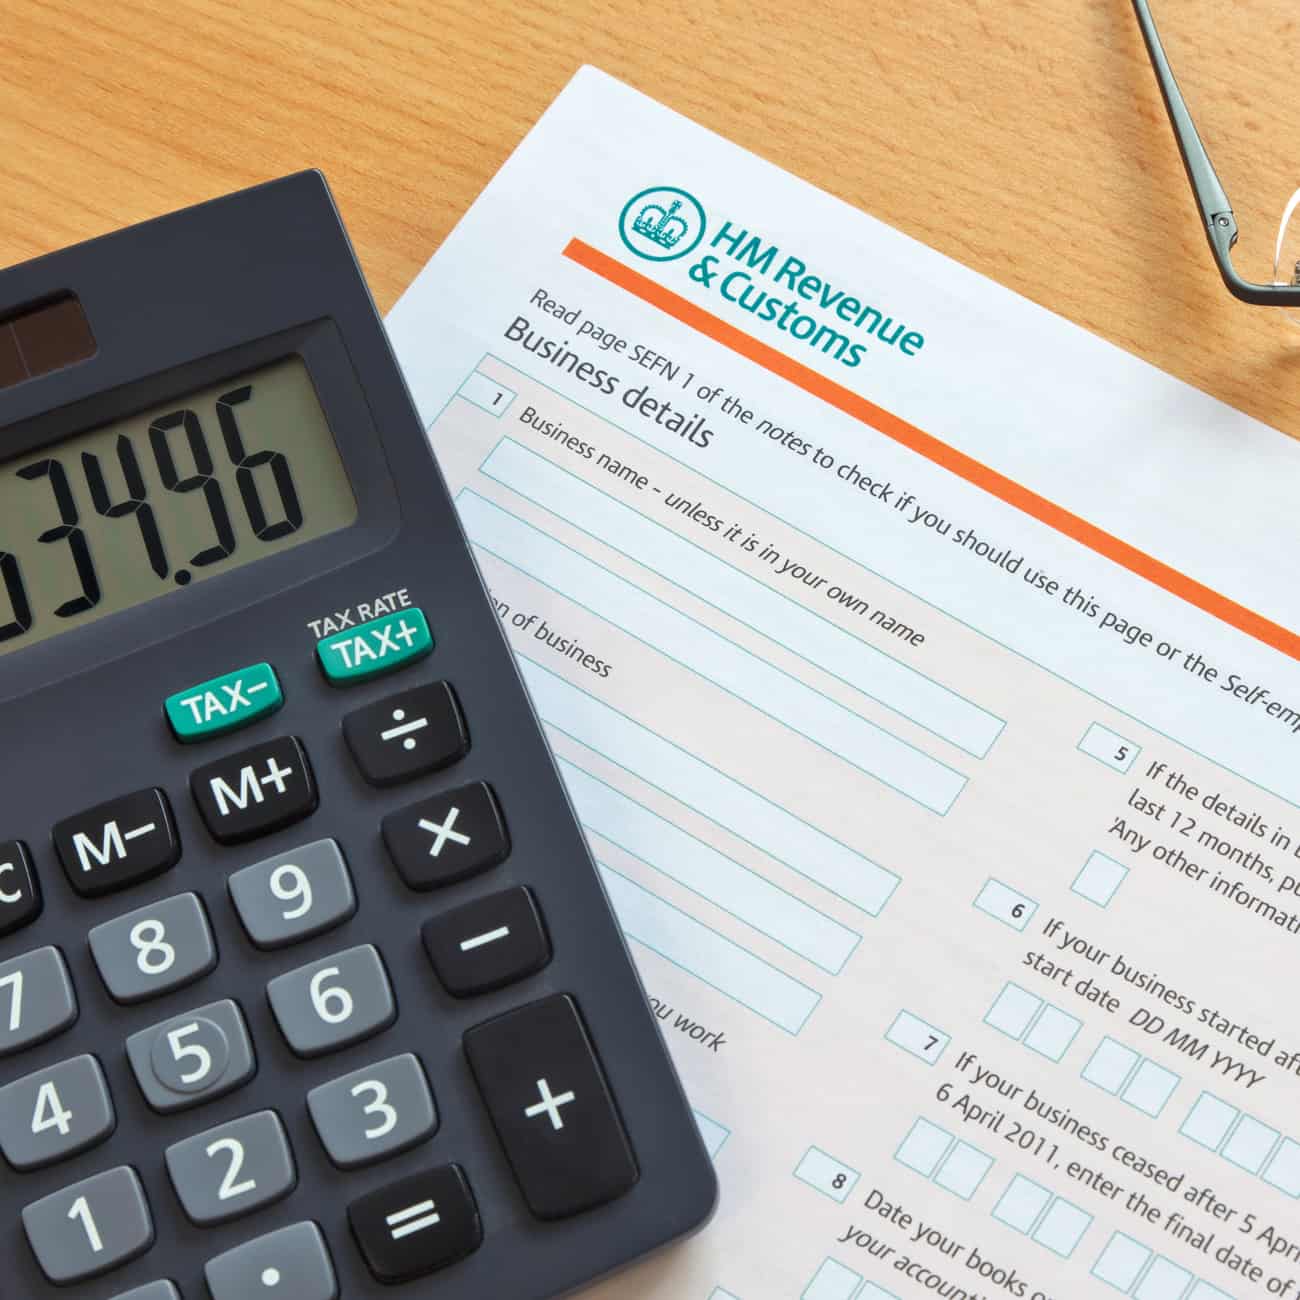 Self employment tax form and calculator on a desk